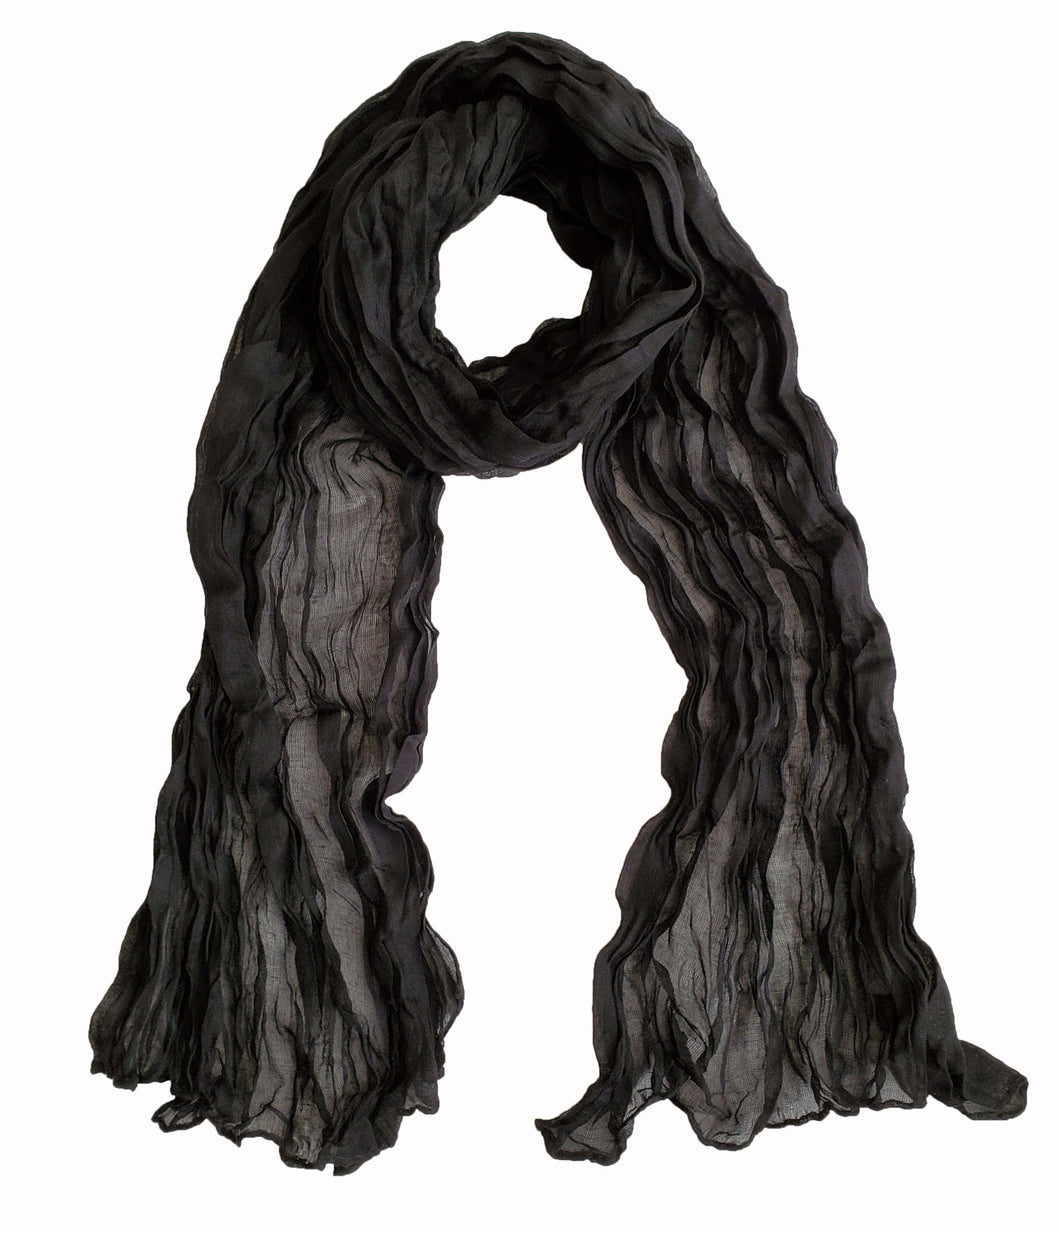 Solid Color Pleated Scarf Lightweight Scarves for Women Girls FashionSolid